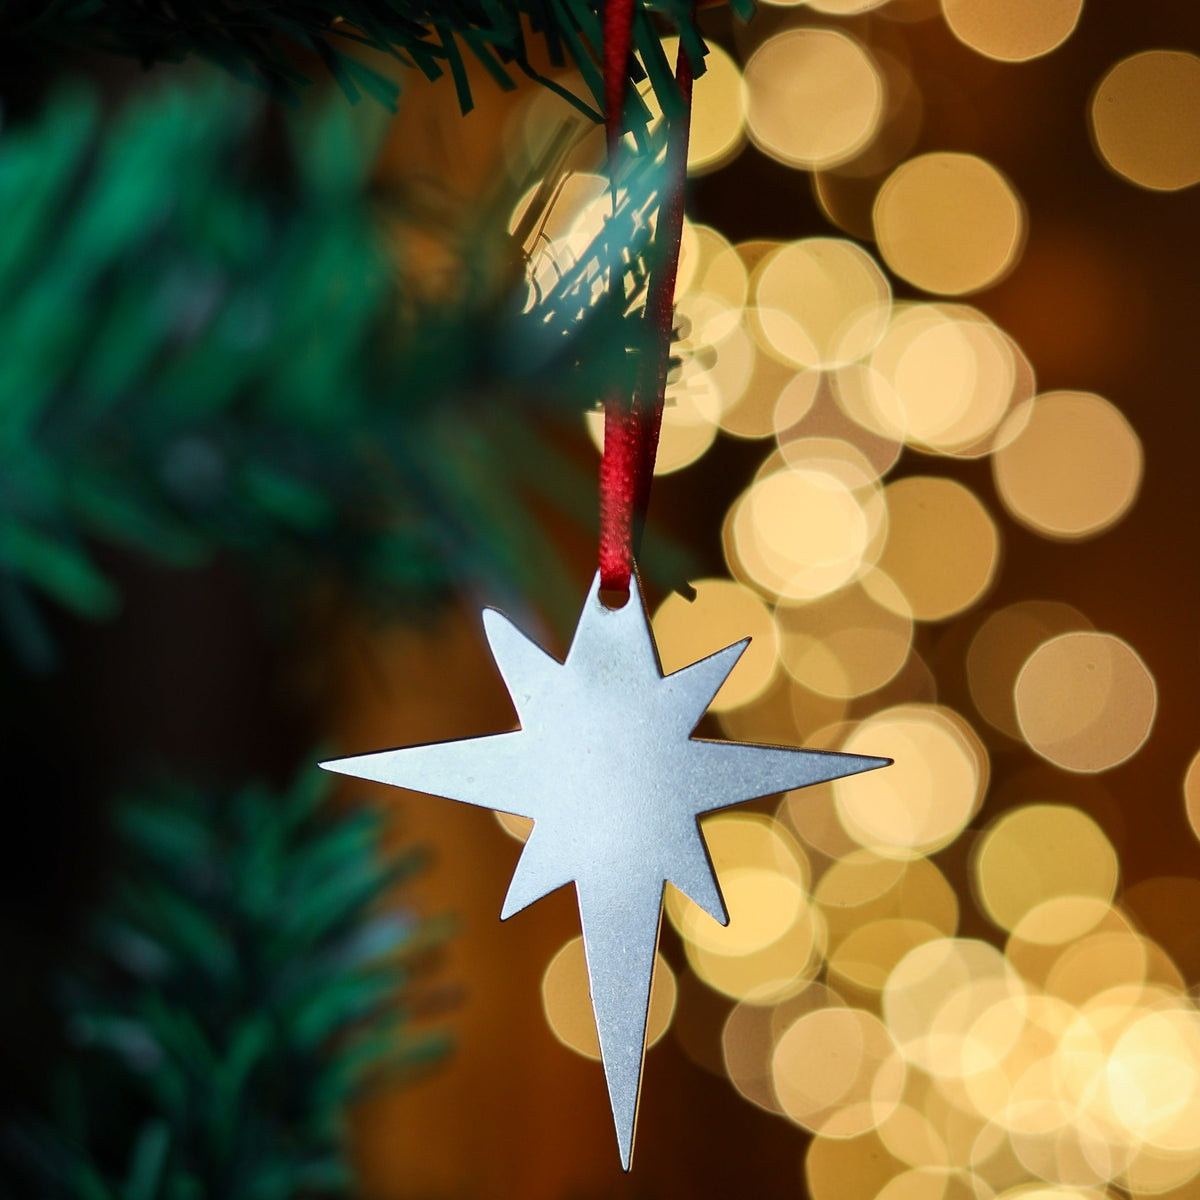 Set of Star & Moon Stainless Steel Christmas Decorations by Pivot